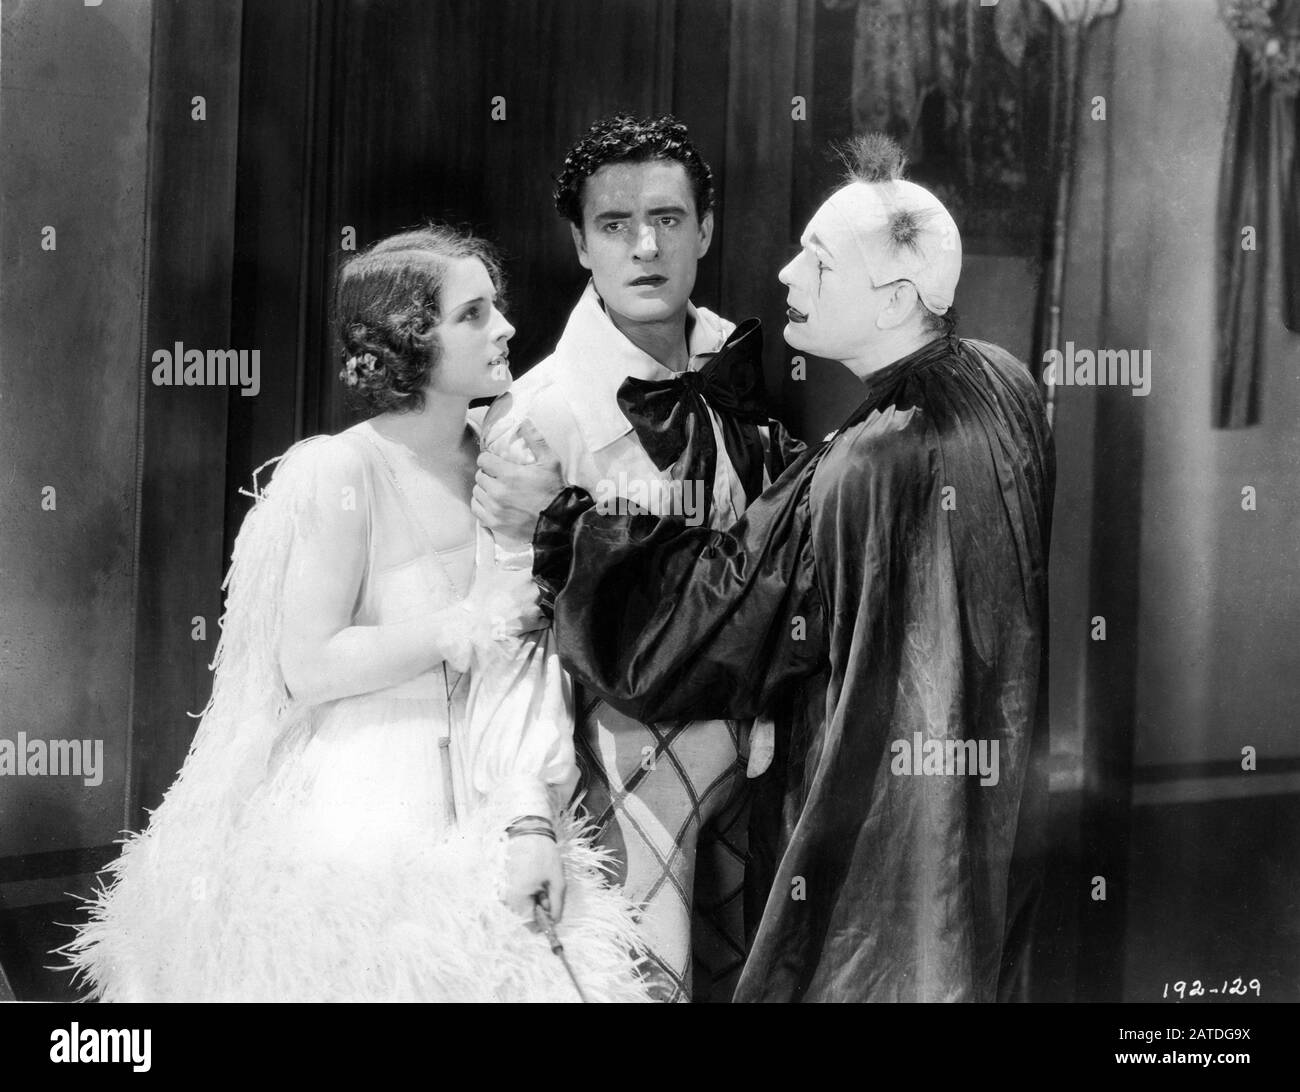 NORMA SHEARER JOHN GILBERT and LON CHANEY in HE WHO GETS SLAPPED 1924 director VICTOR SEASTROM / SJOSTROM from play by Leonid Andreyev Silent movie producer LOUIS B. MAYER Metro - Goldwyn Pictures Corporation Stock Photo